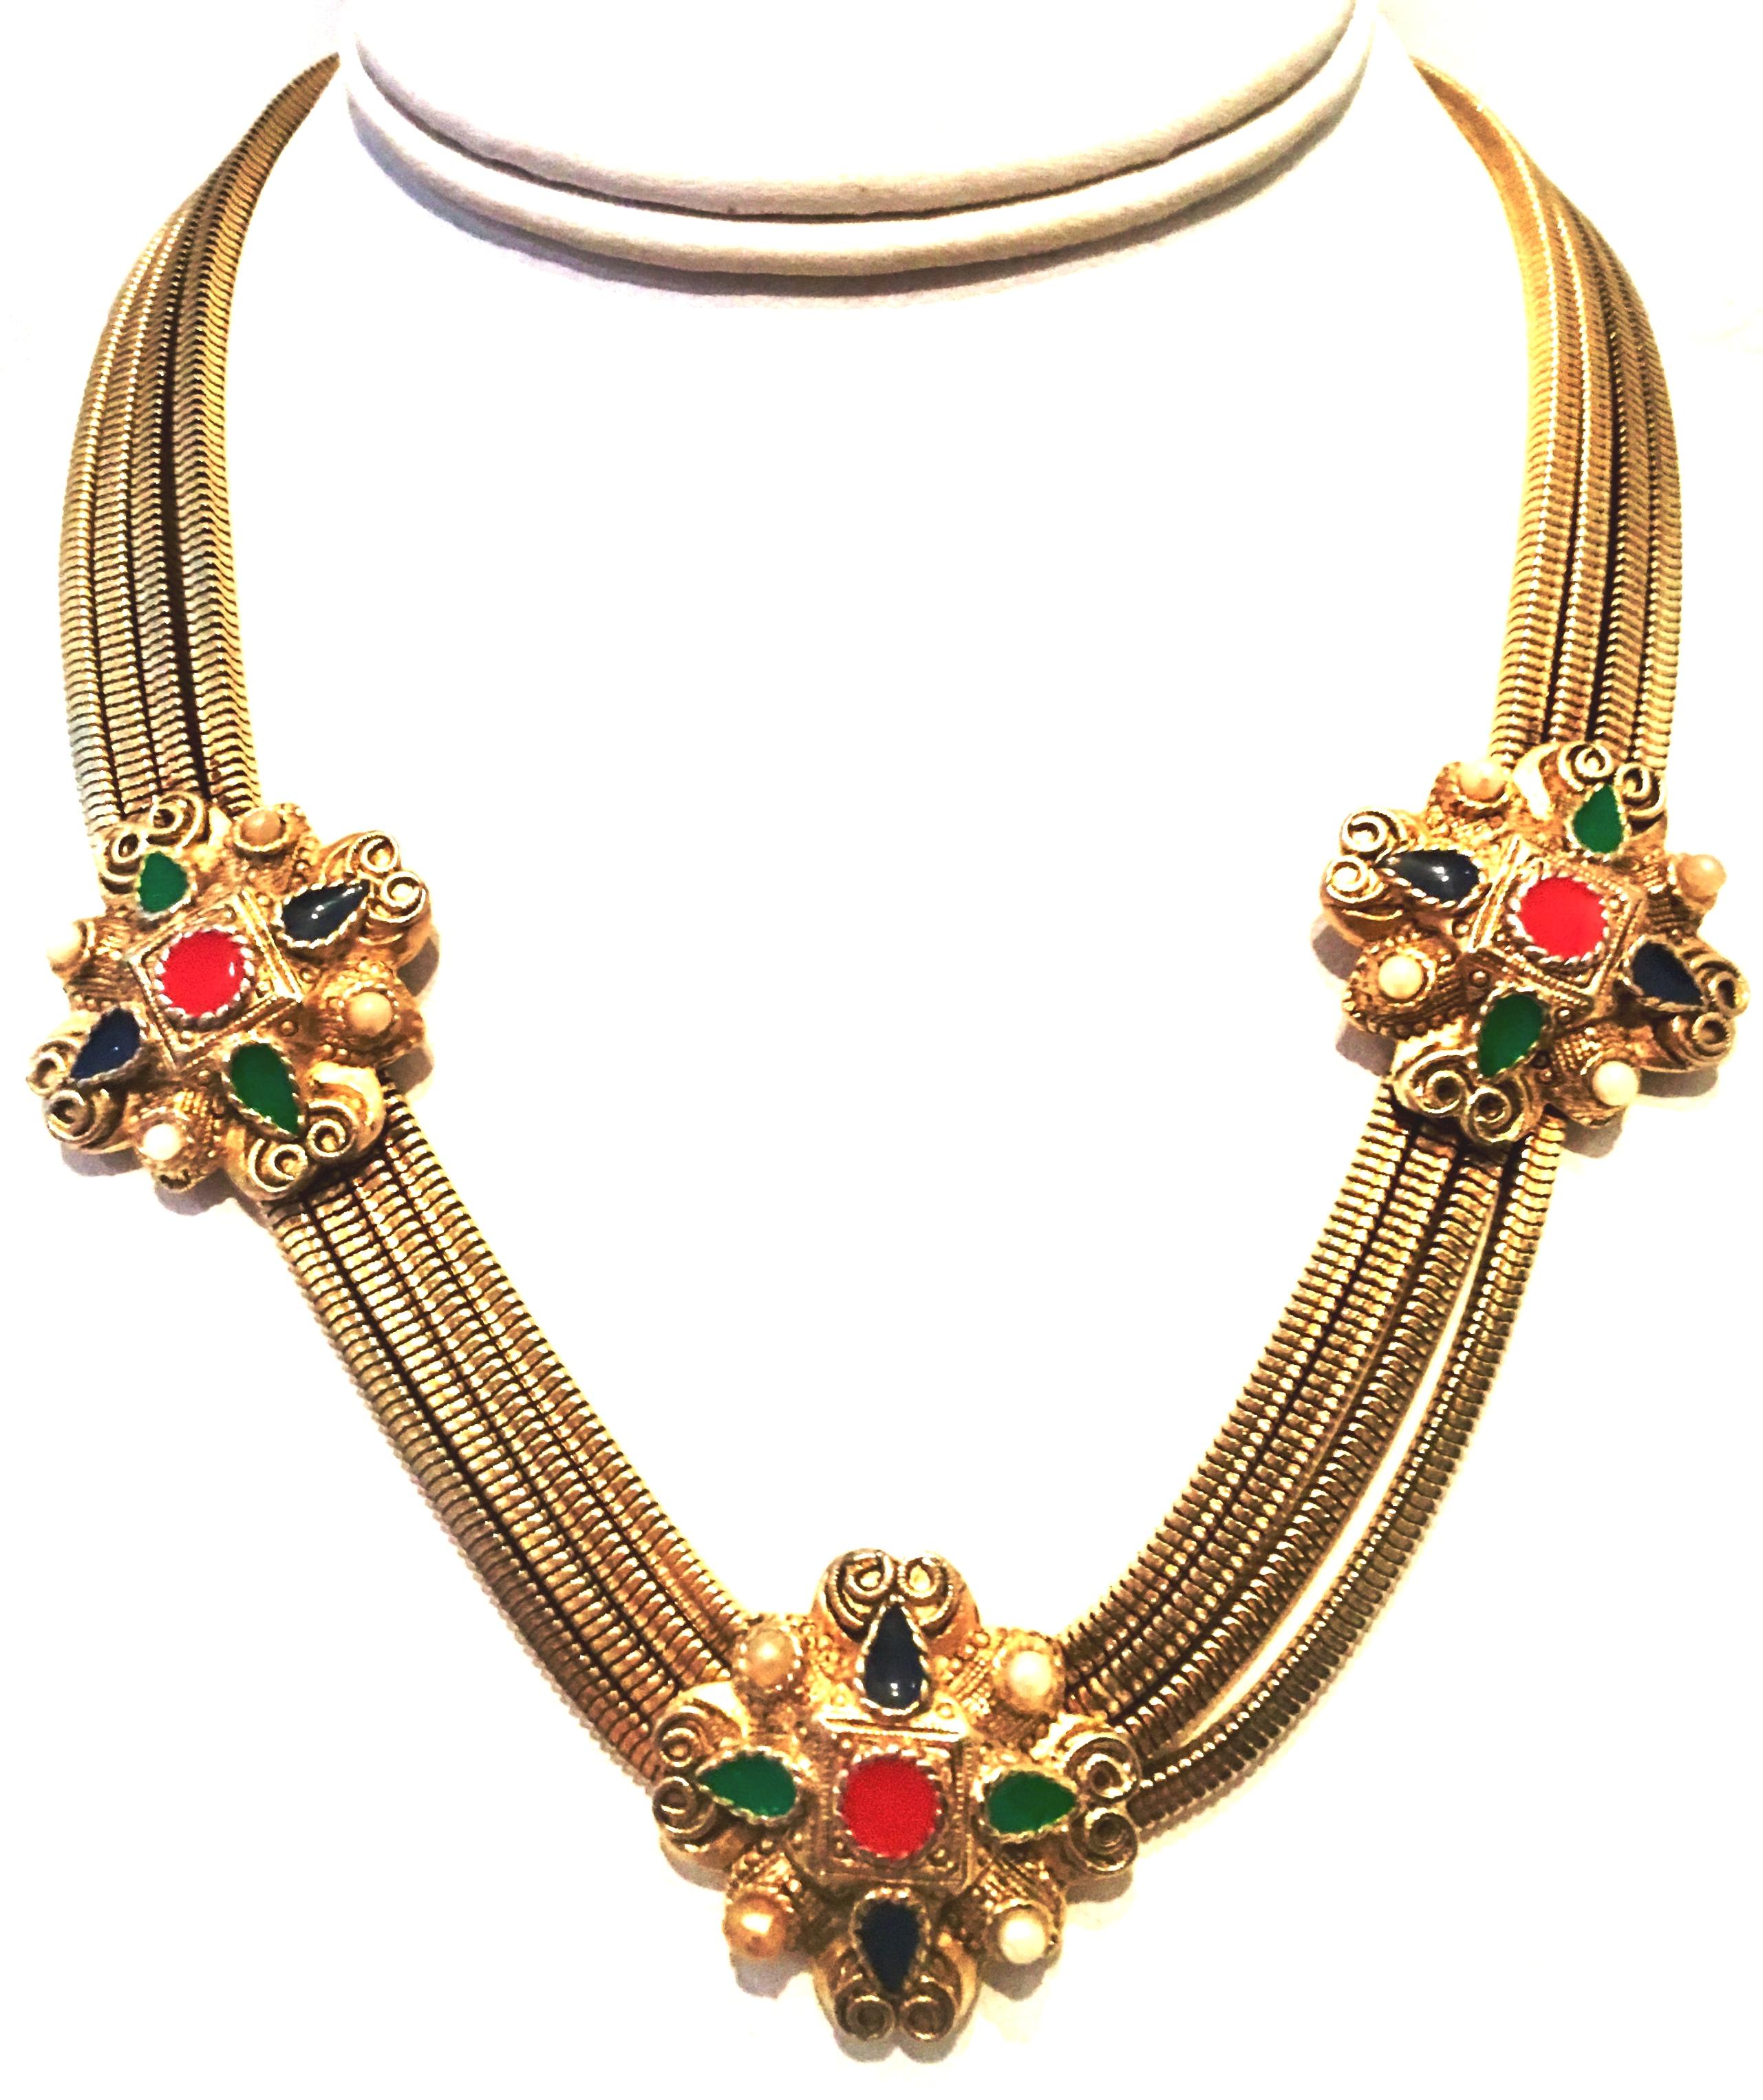 20th Century Etruscan Style Gold Plate Four Strand Snake Chain & Ornamental Choker Style Necklace.
This unique piece features four strands of gold plate snake style chain with three applied 1.25